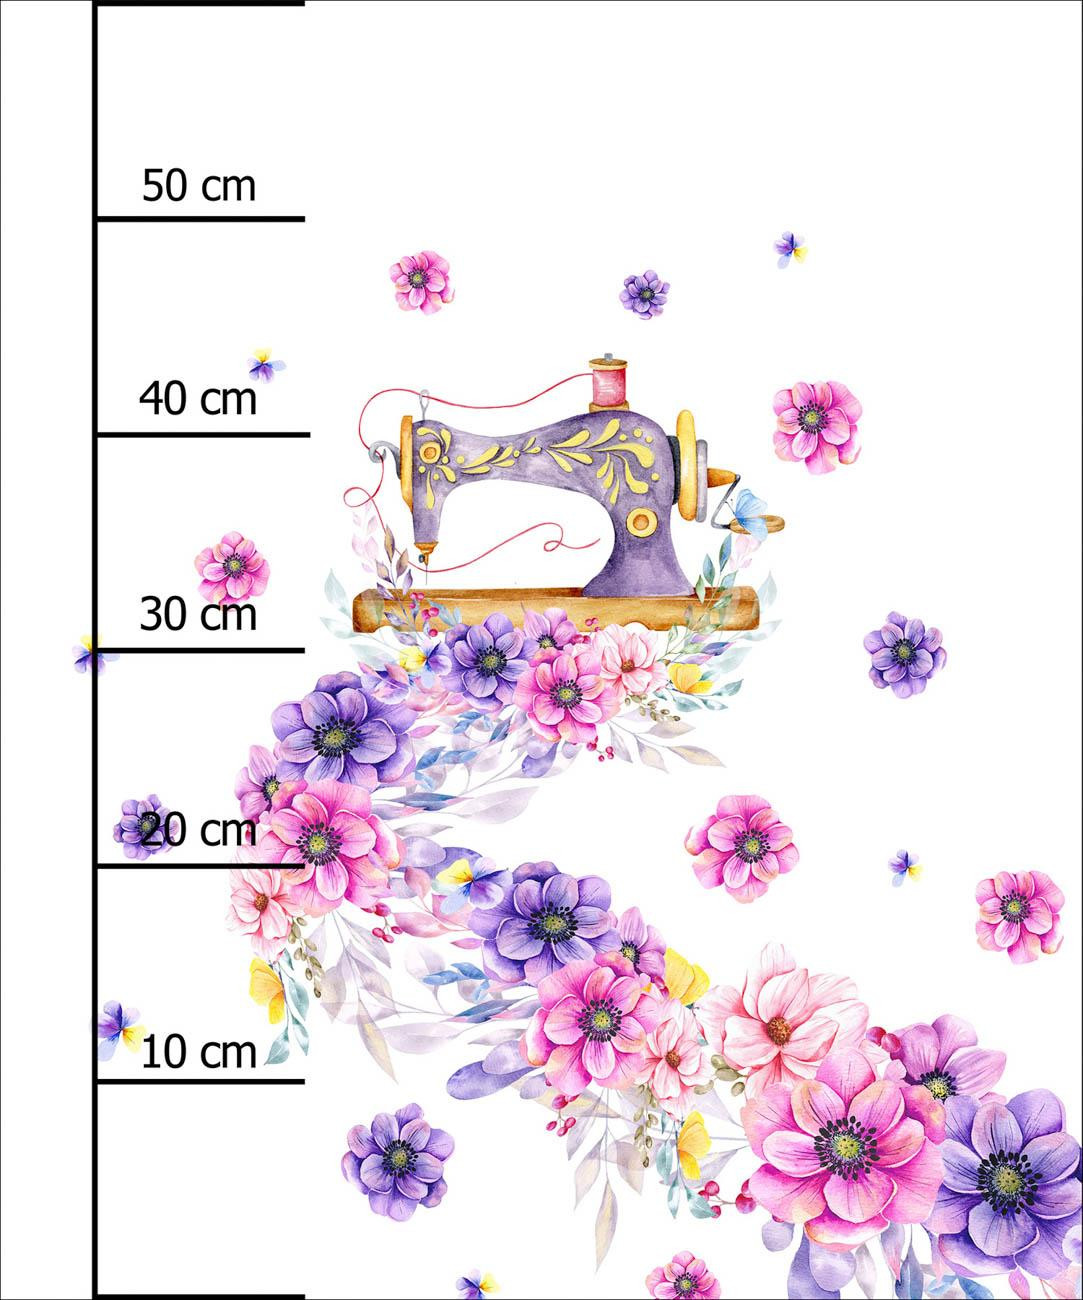 SEWING MACHINE AND FLOWERS - PANEL (60cm x 50cm) SINGLE JERSEY